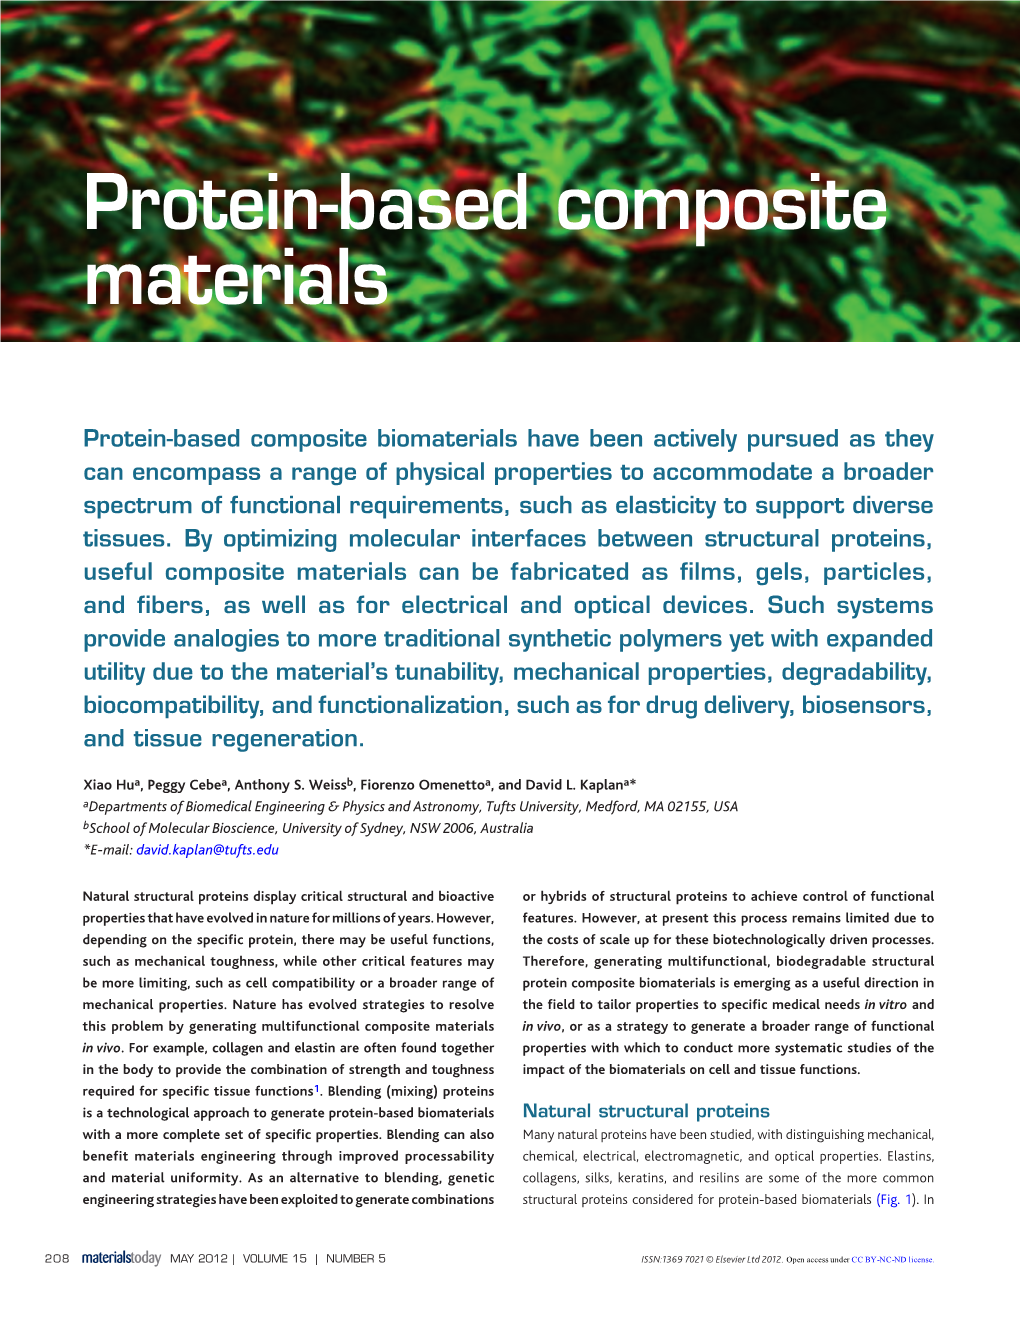 Protein-Based Composite Materials